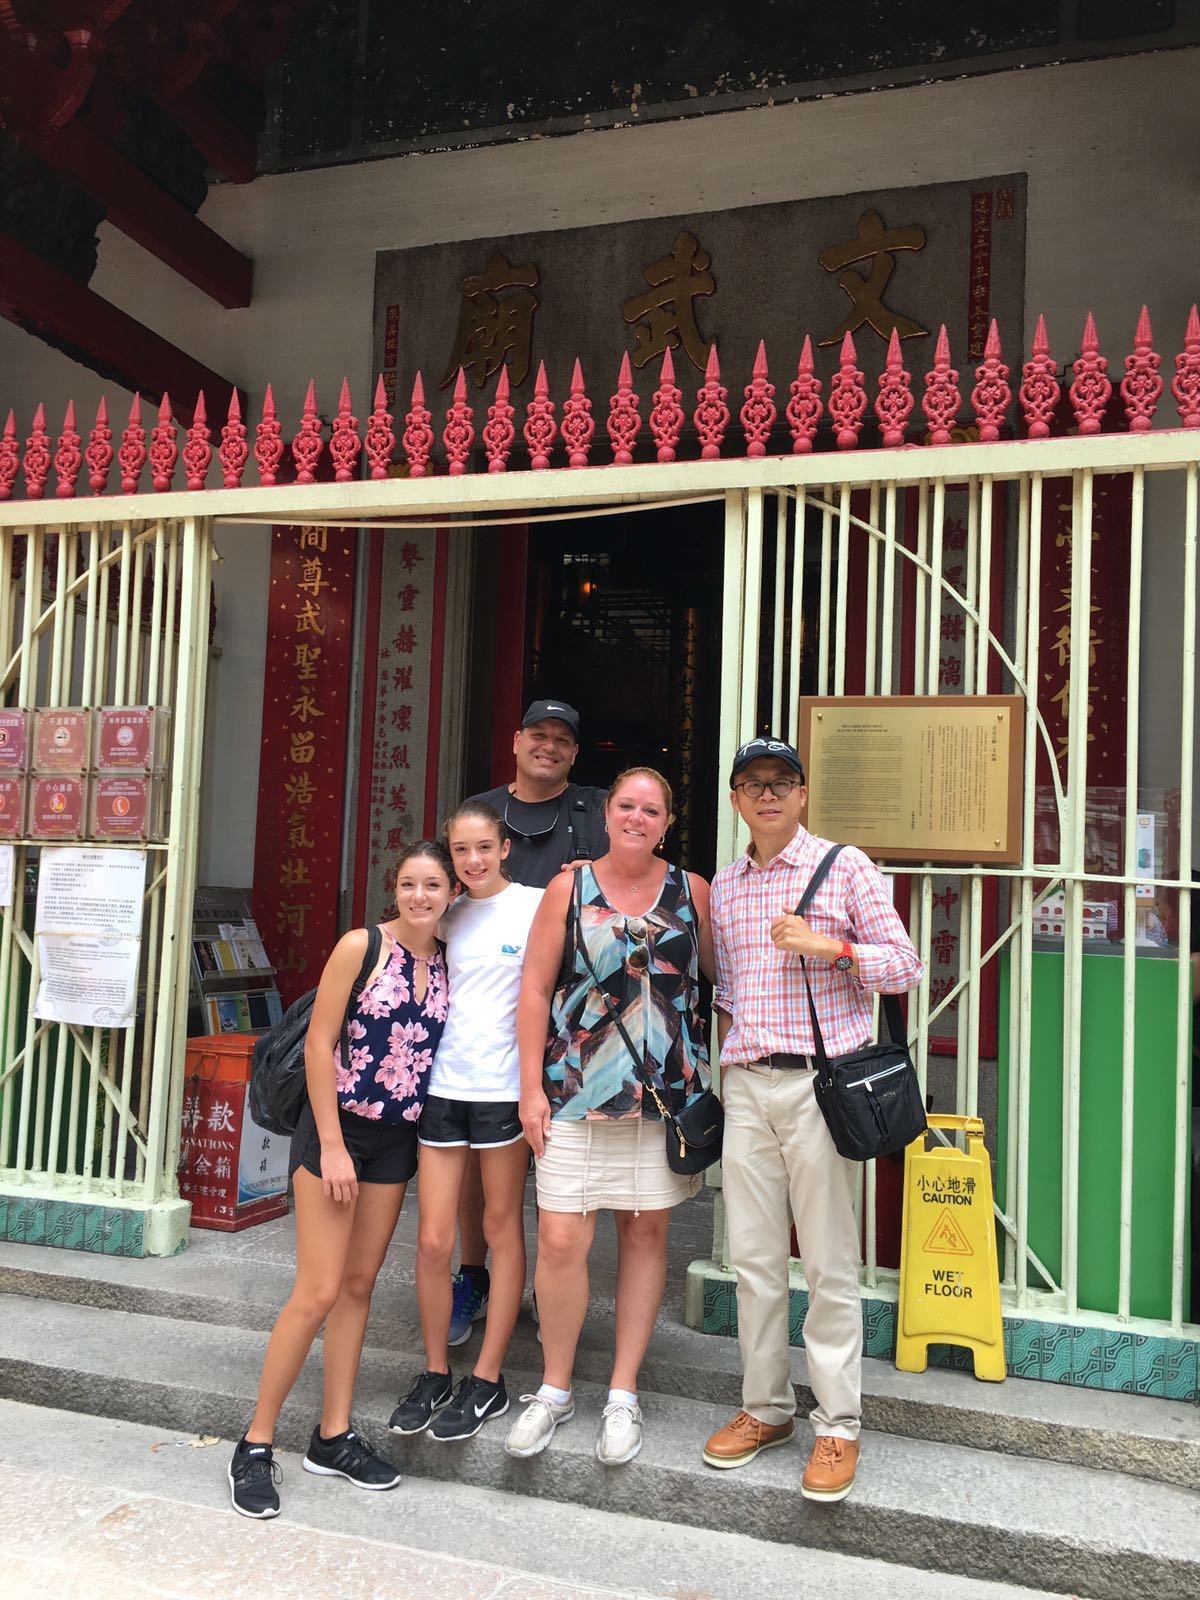 Review of June 2017, Lantau sunset tour and traveler Spanish course